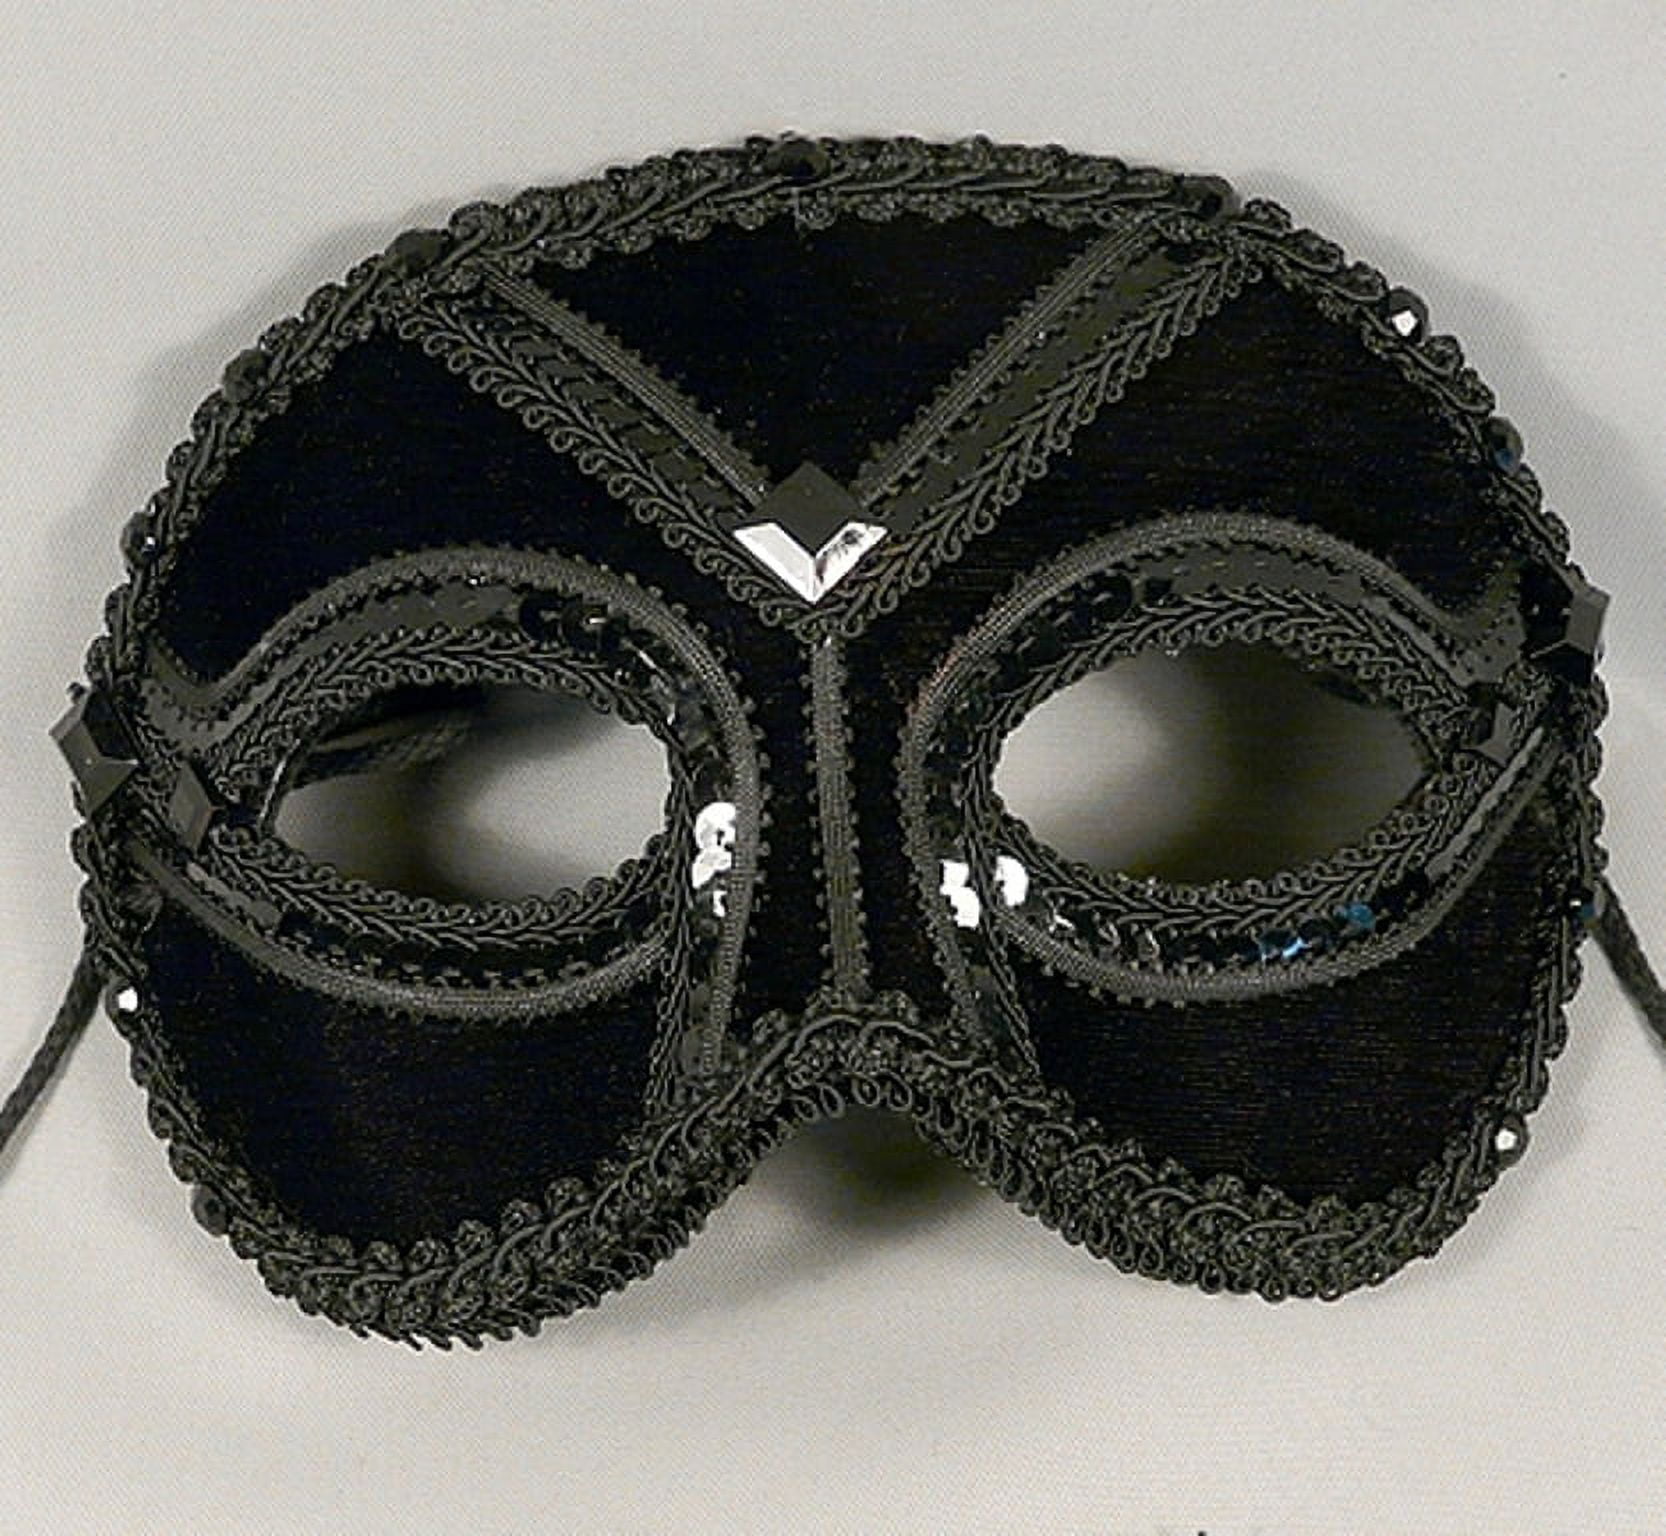 Black Tassel Mysterious Masquerade Party mask,Beautiful mask,Court Ball Party,Birthday Party mask,Dance mask,carnival masks,creative Mask